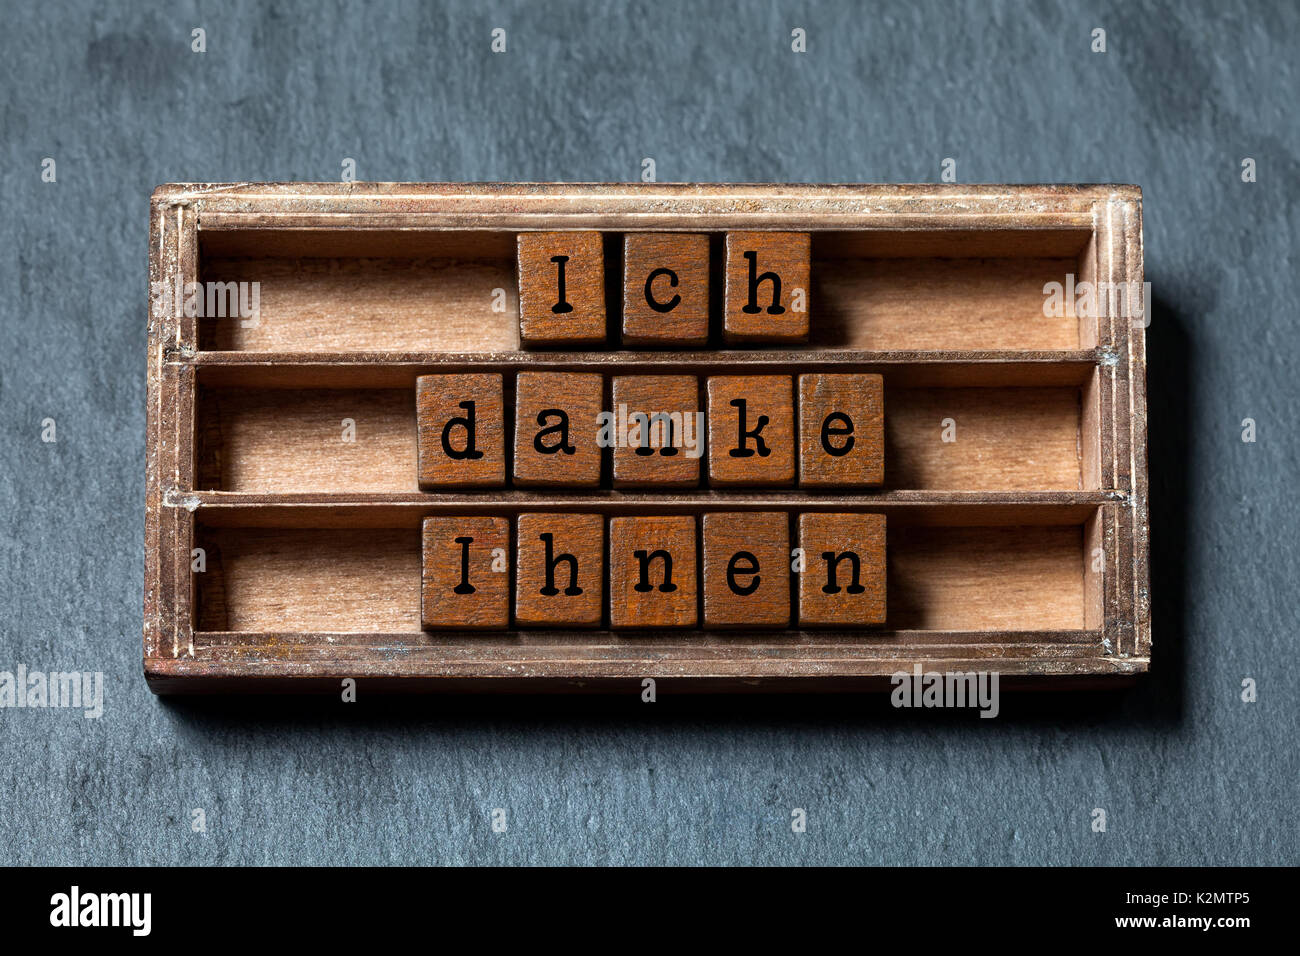 Ich danke Ihnen. Thank you in German translation. Vintage box, wooden cubes thankful phrase message written with old style letters. Gray stone textured background. Close-up, up view, soft focus Stock Photo